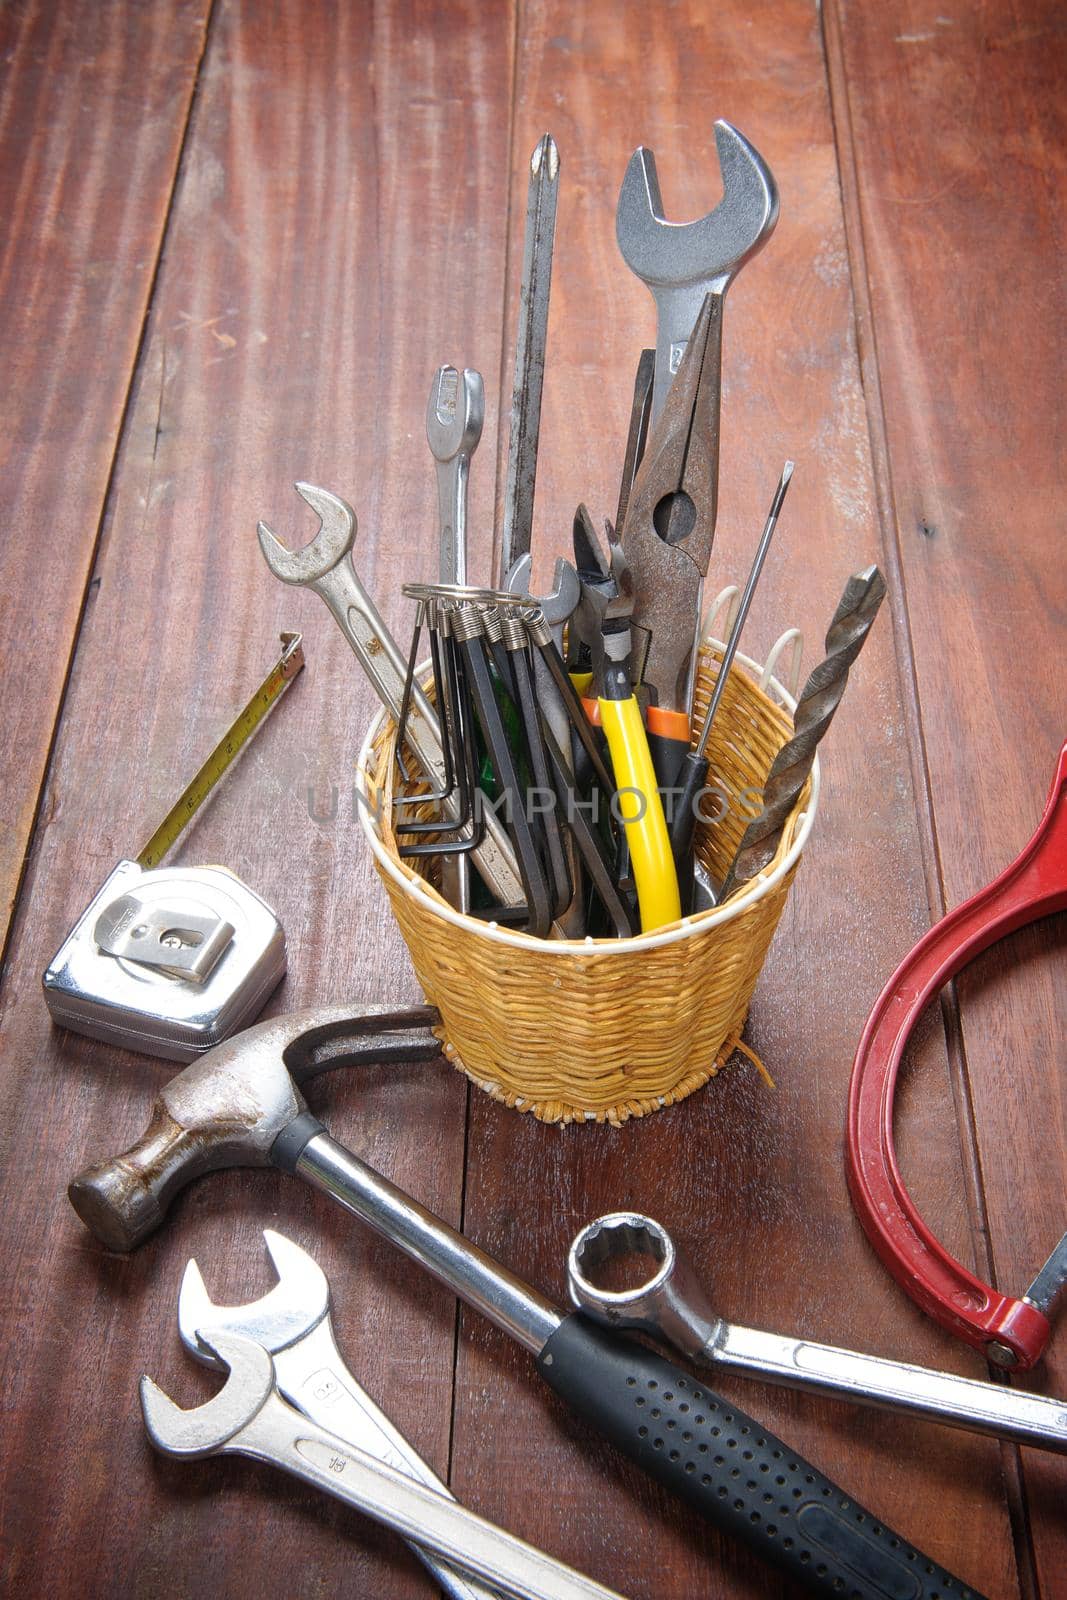 many tools in the basket on wooden plank